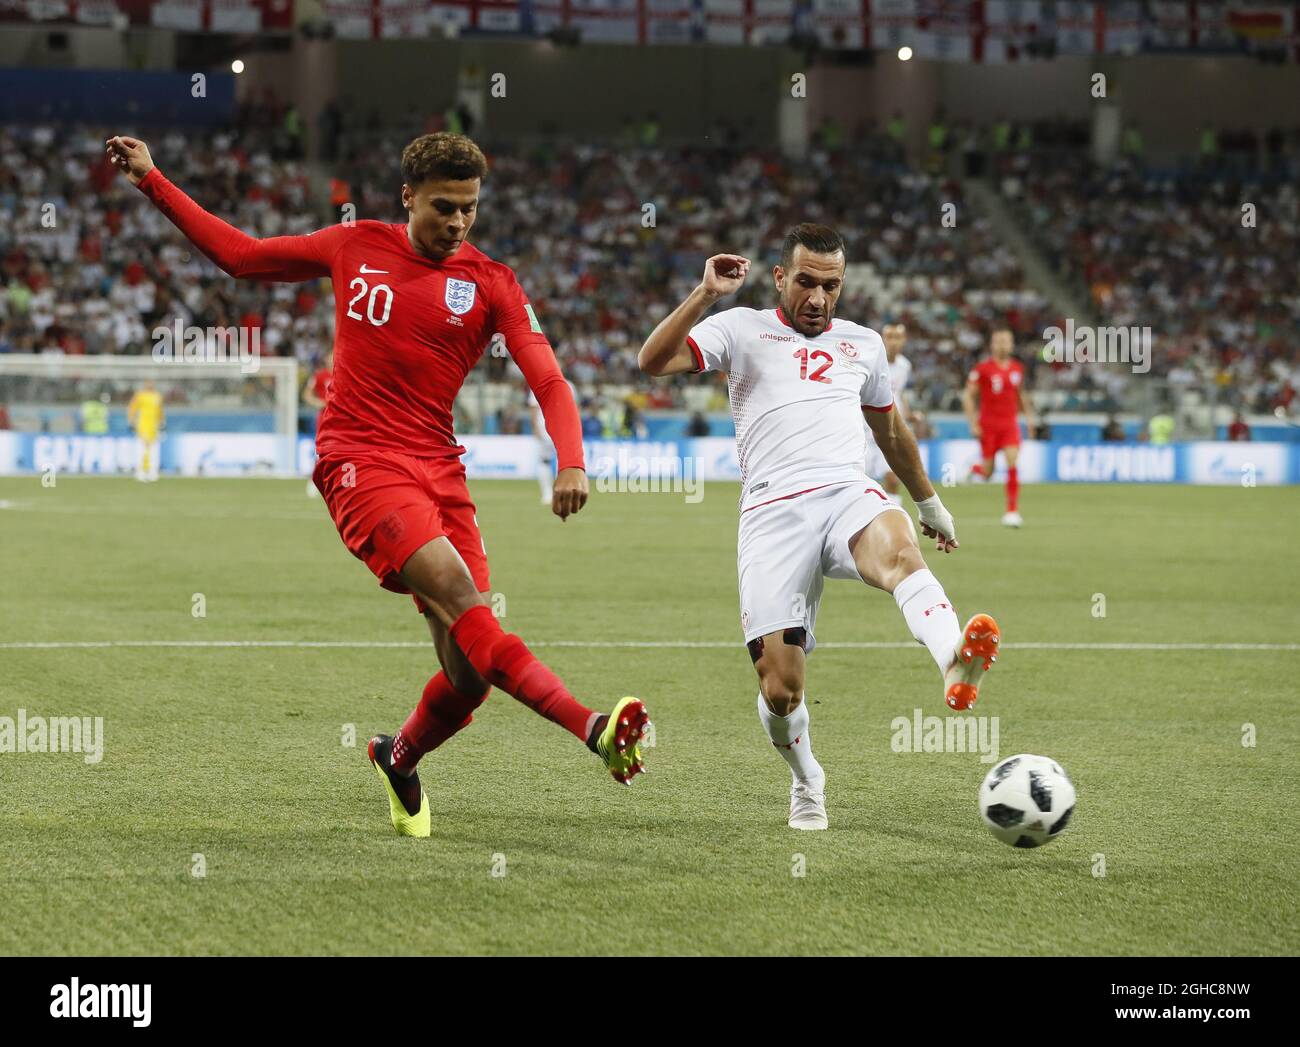 Dele Alli of England shoots past Ali Maaloul of Tunisia during the FIFA World Cup 2018 Group G match at the Volgograd Arena, Volgograd. Picture date 18th June 2018. Picture credit should read: David Klein/Sportimage via PA Images Stock Photo